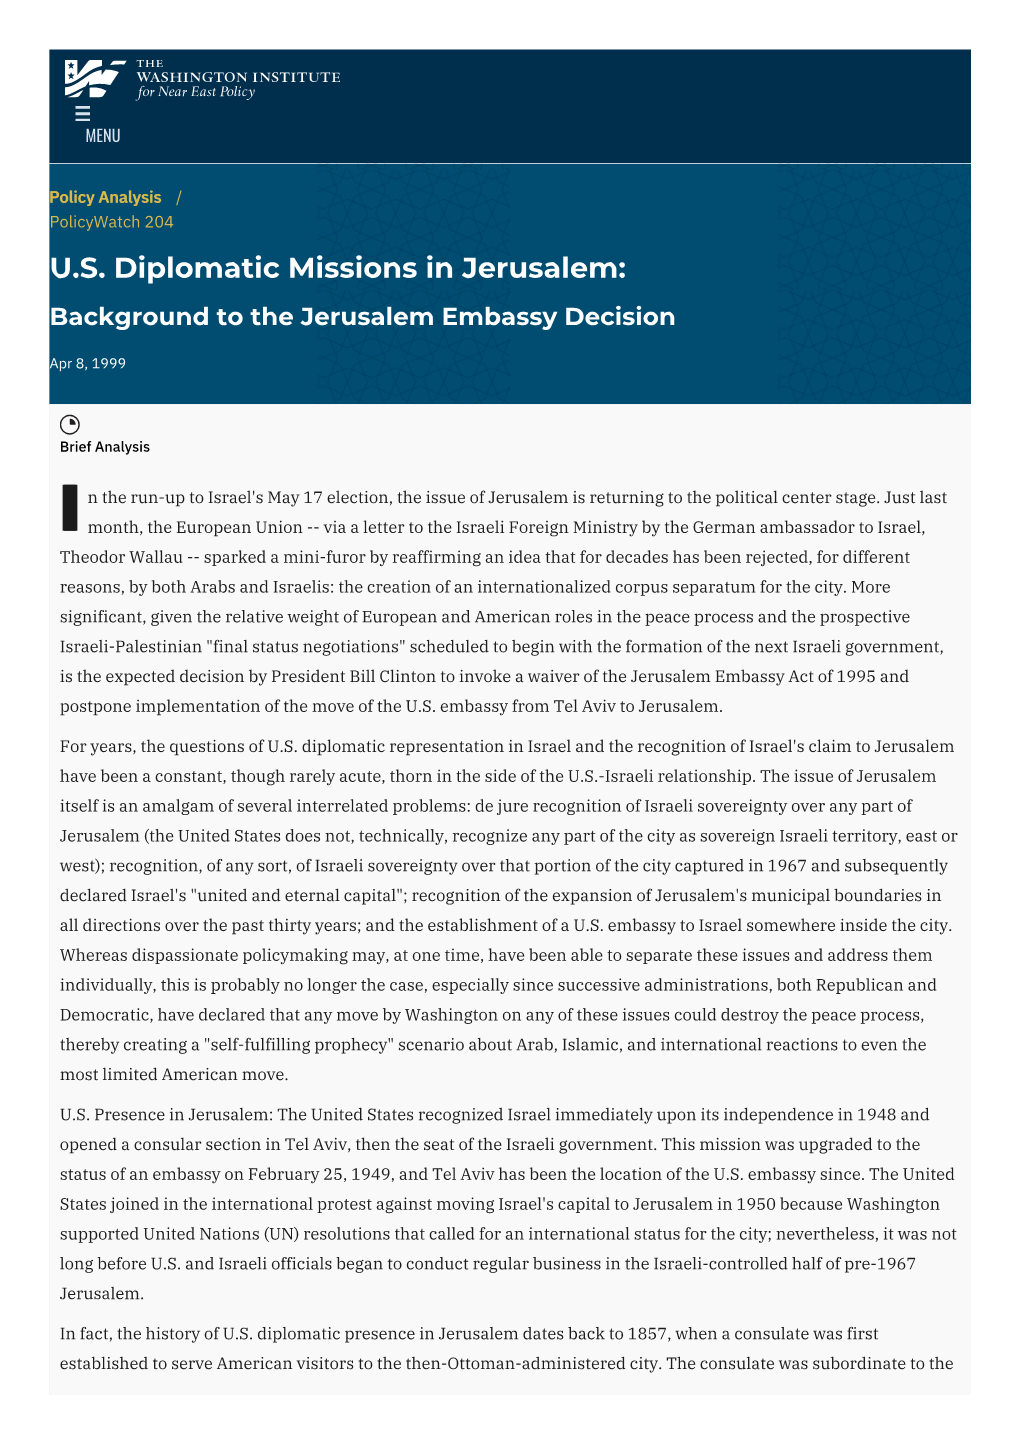 U.S. Diplomatic Missions in Jerusalem: Background to the Jerusalem Embassy Decision | the Washington Institute